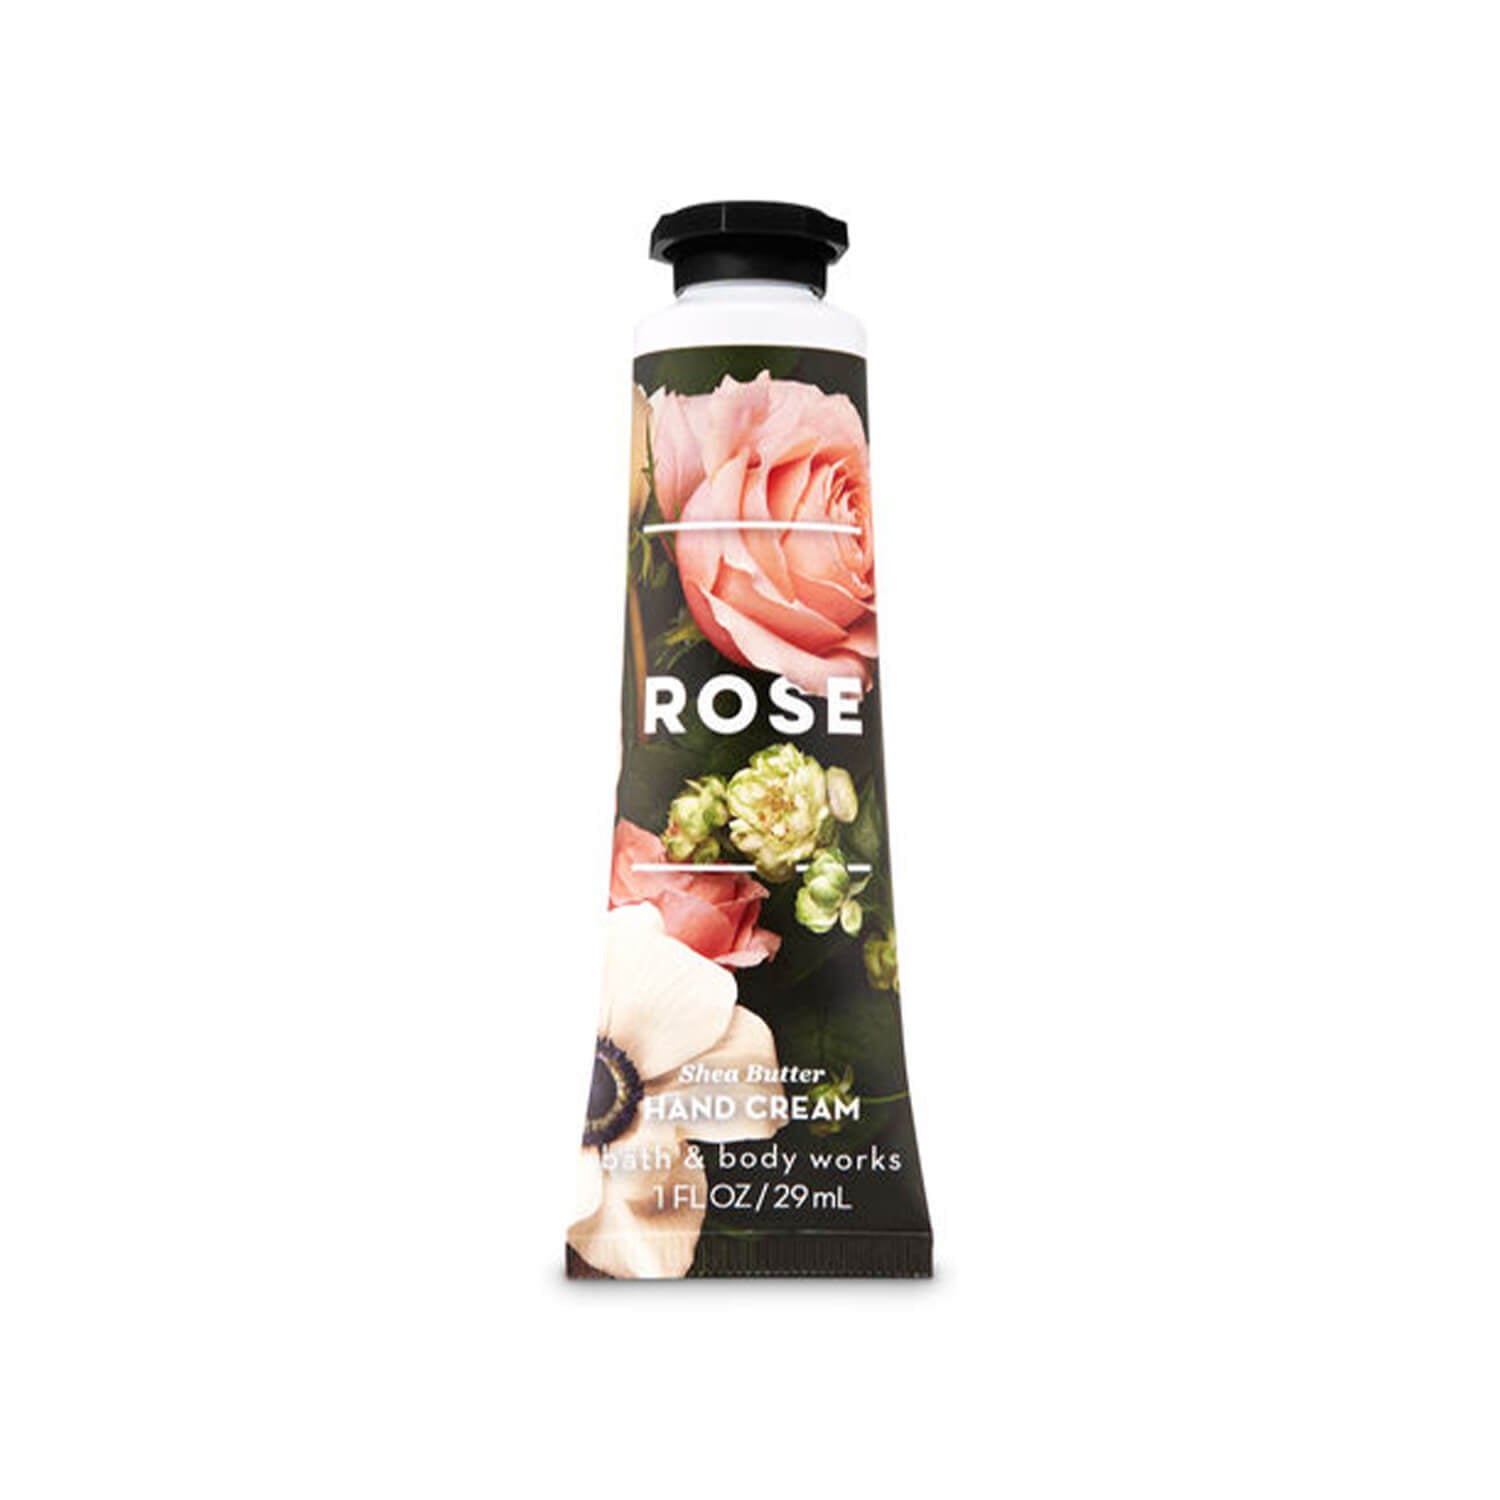 Bath and Body Works hand cream travel size Rose available at Heygirl.pk for delivery in Karachi, Lahore, Islamabad across Pakistan. 